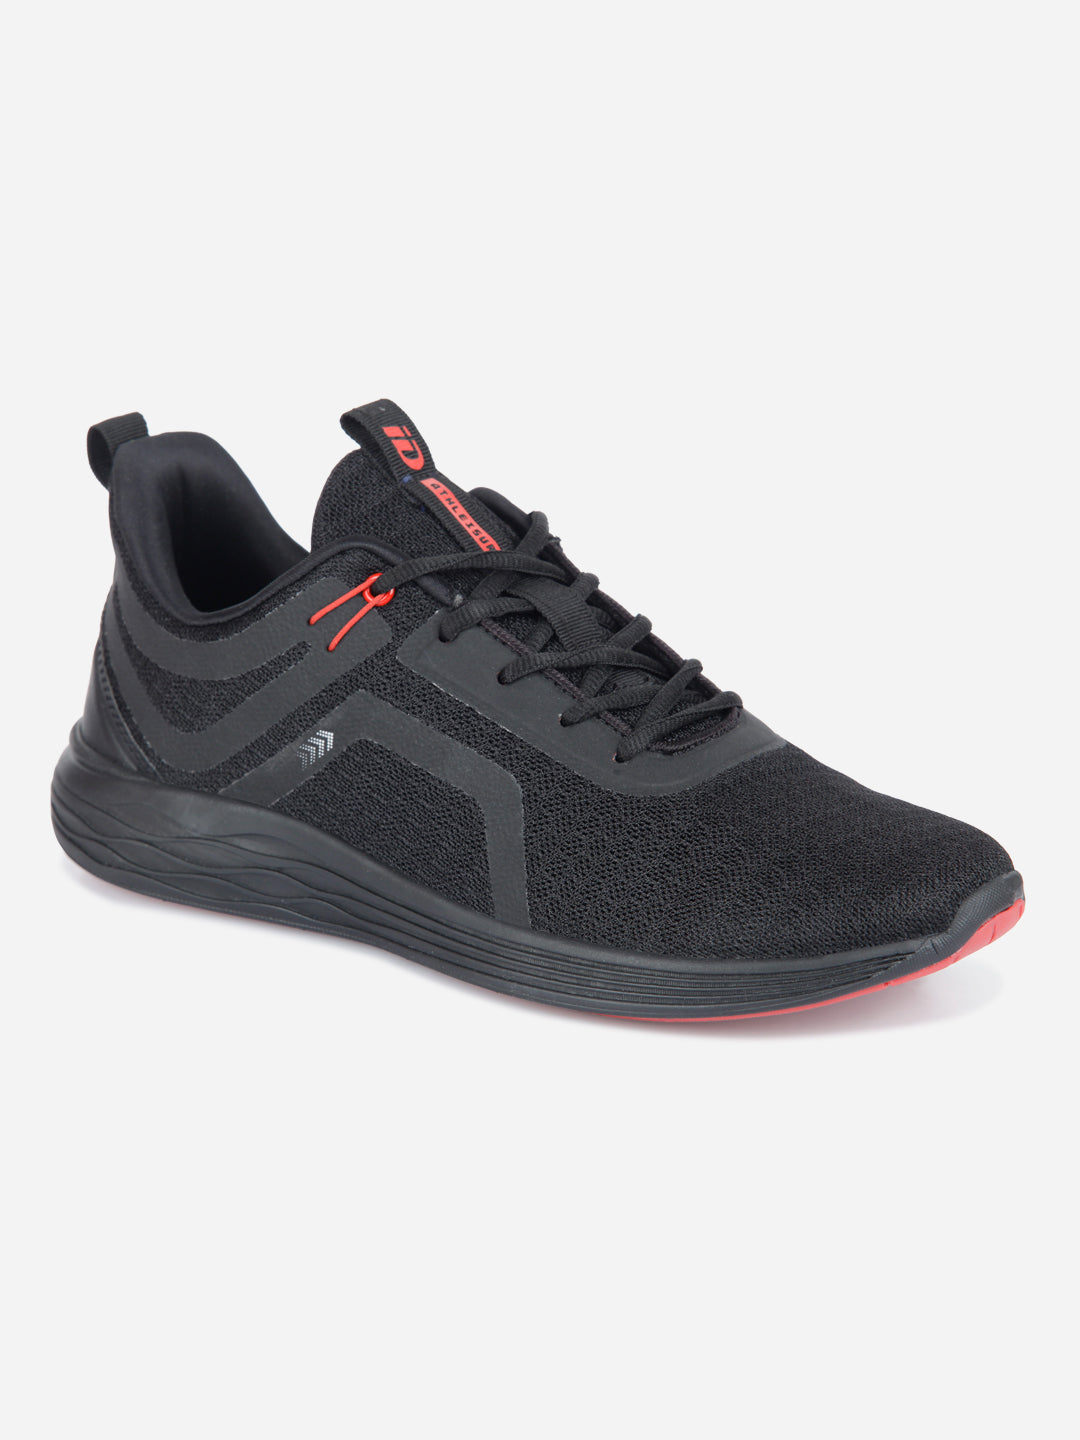 Men's Black Lace Up Sneaker (ID7513) - Sneakers | Shop at Rs. 2,185 ...